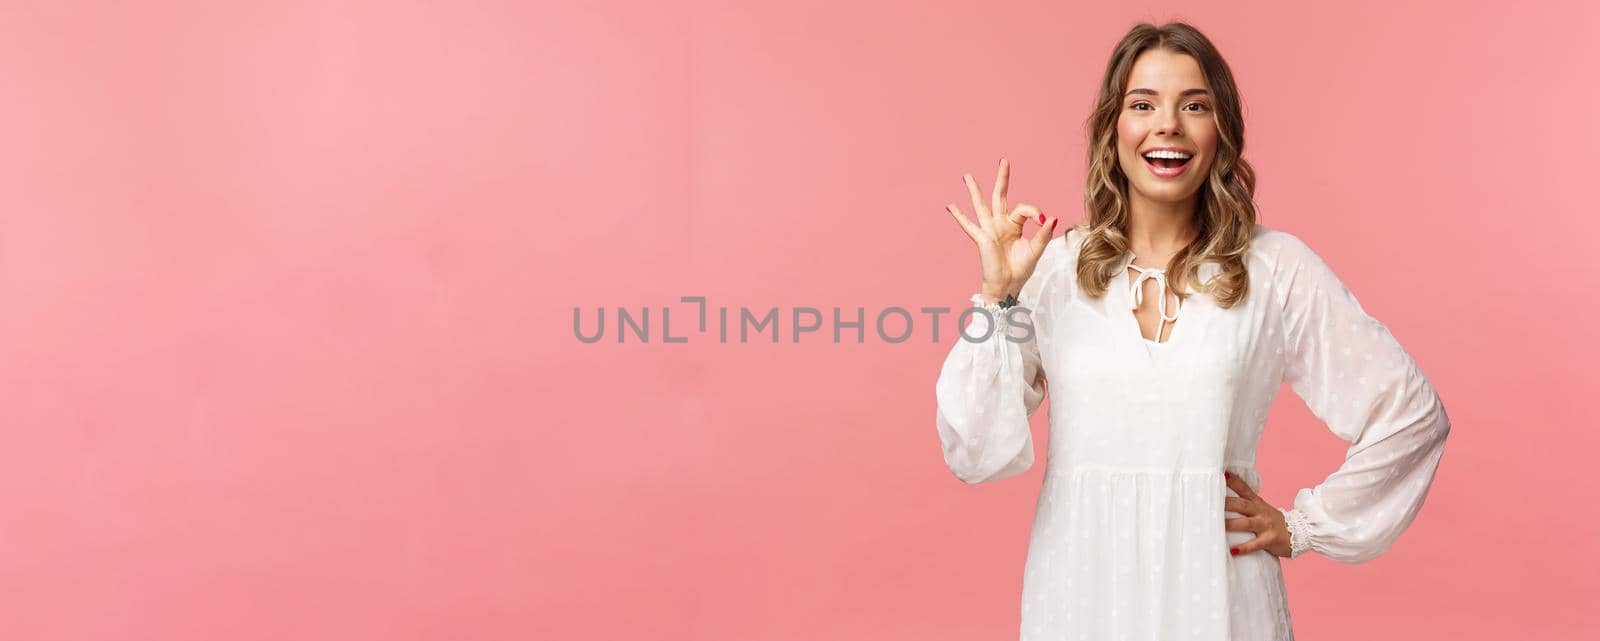 Portrait of carefree good-looking blond girl, wear white dress, guarantee you will like this special spring offer, show okay sign, agree or accept, smiling and nod in approval, pink background.